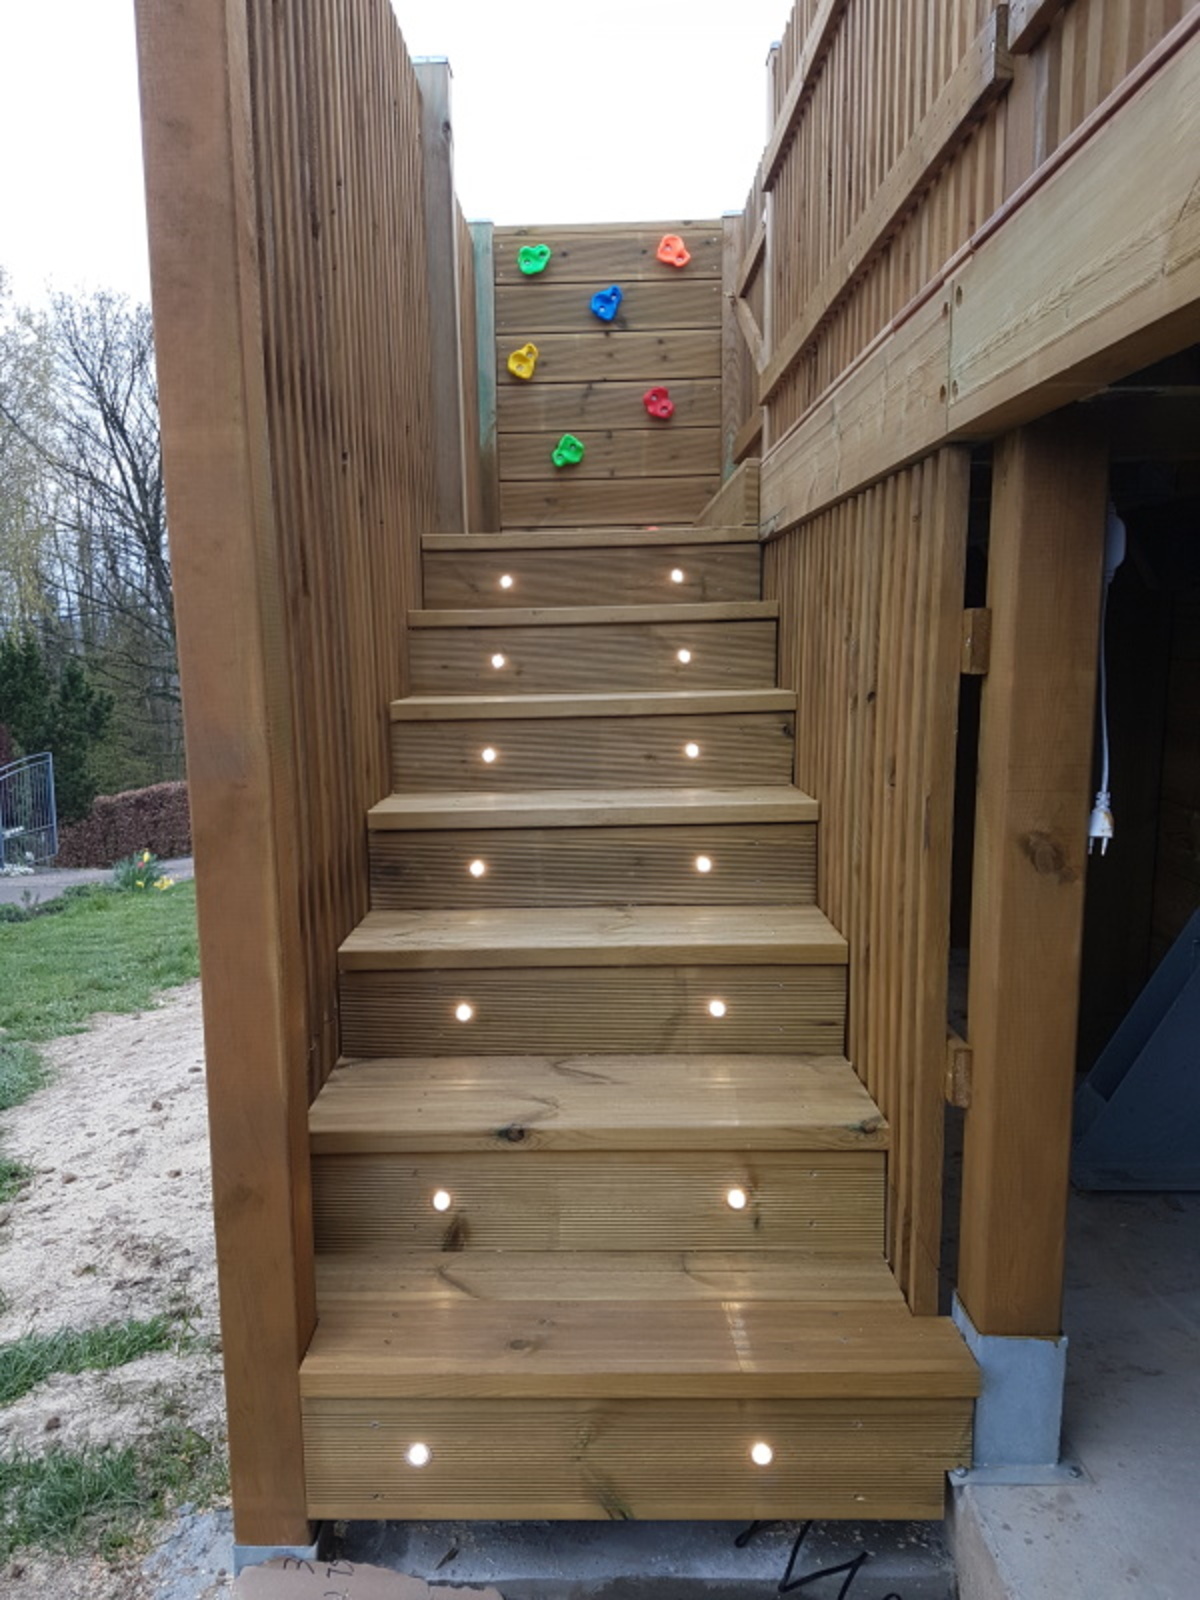 Deck stairs for kids play tower